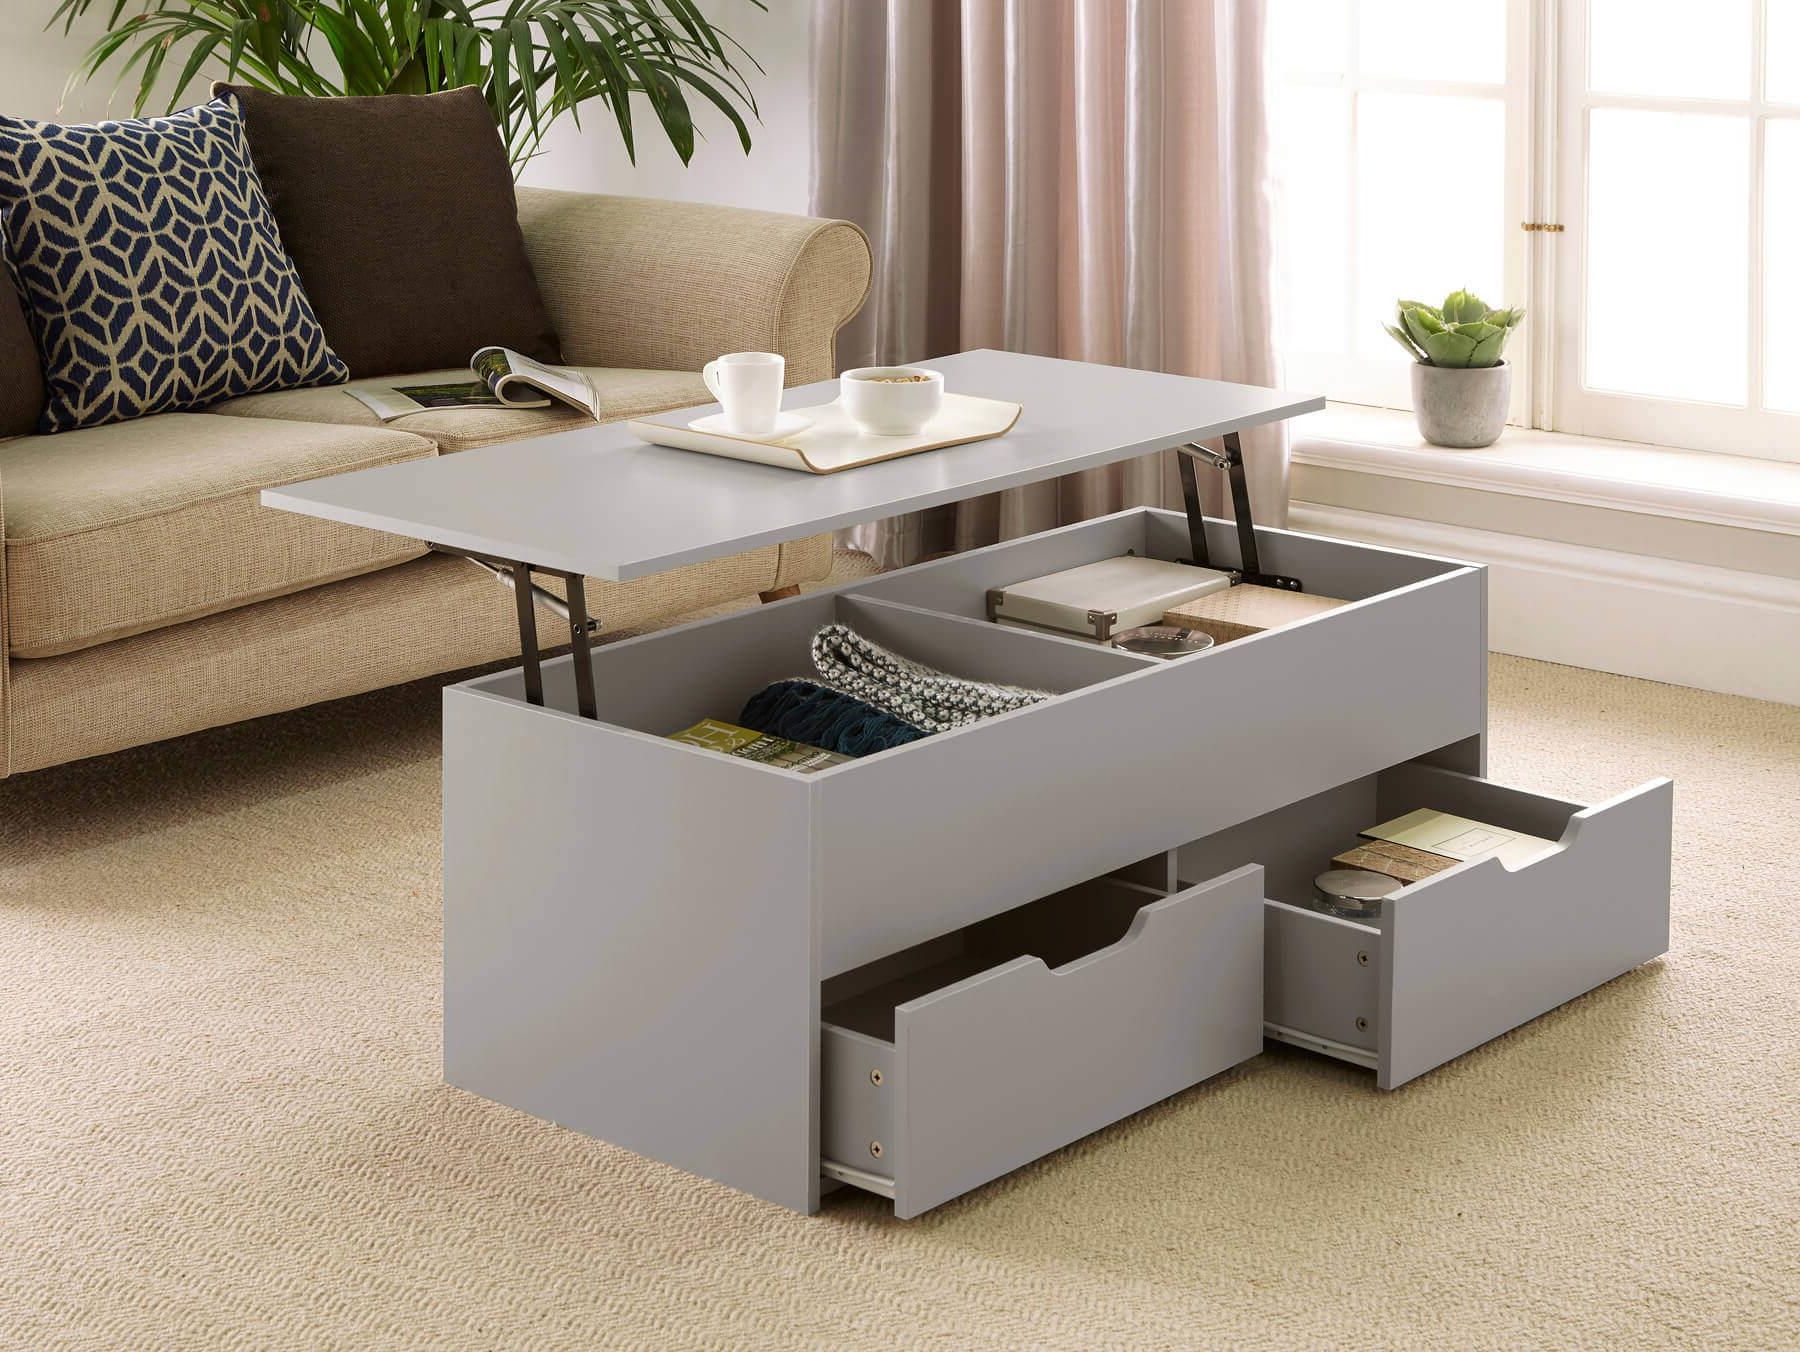 Latest Lift Top Coffee Tables With Storage Drawers Inside Grey Wooden Coffee Table With Lift Up Top And 2 Large Storage Drawers (View 7 of 15)